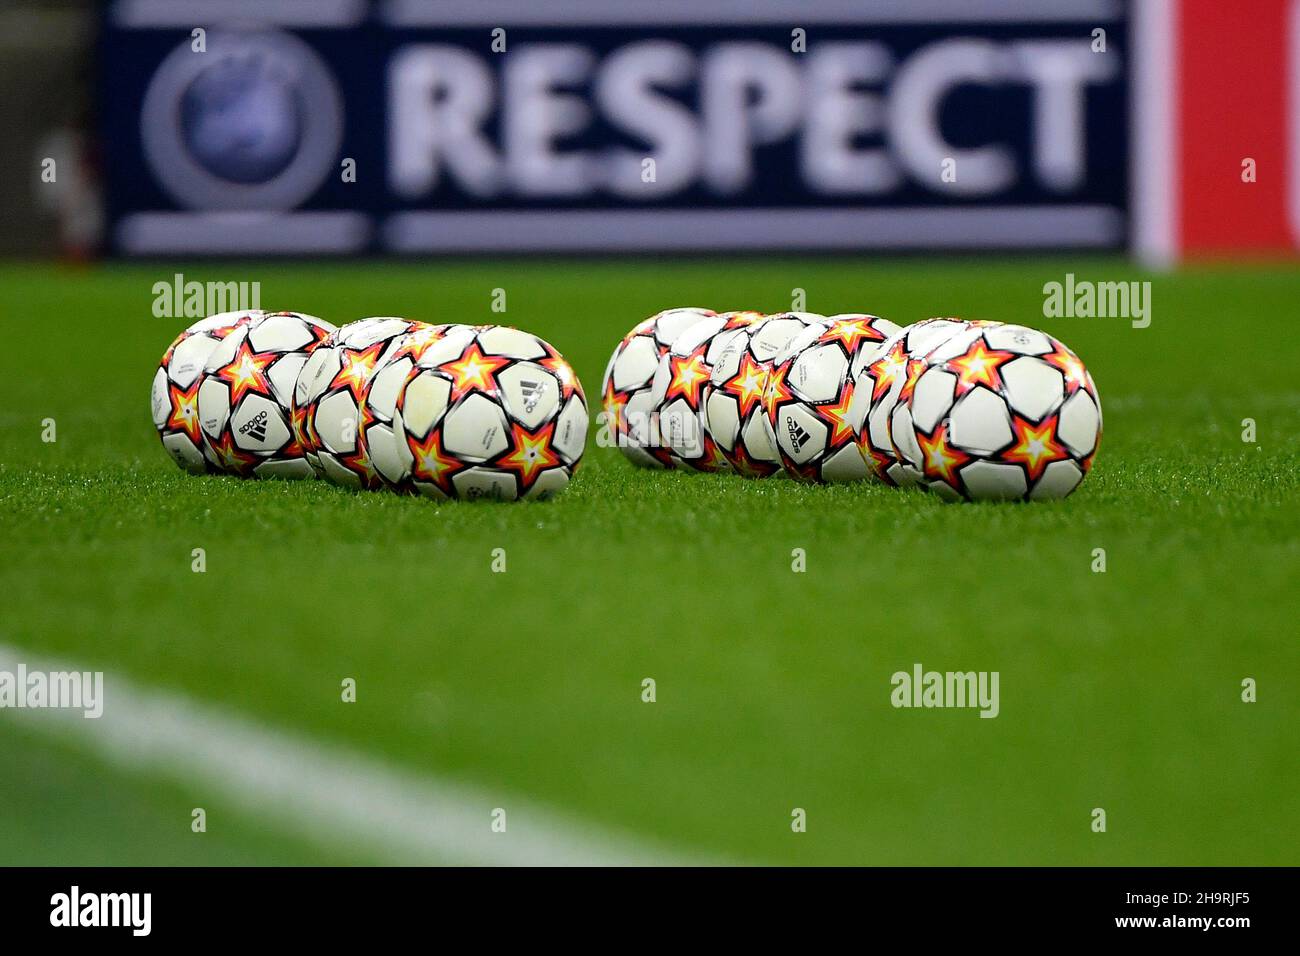 Milano, Italy. 07th Dec, 2021. Two rows of official champions league balls  Adidas are seen in front of a sign saying respect during the Uefa Champions  League Group B football match between